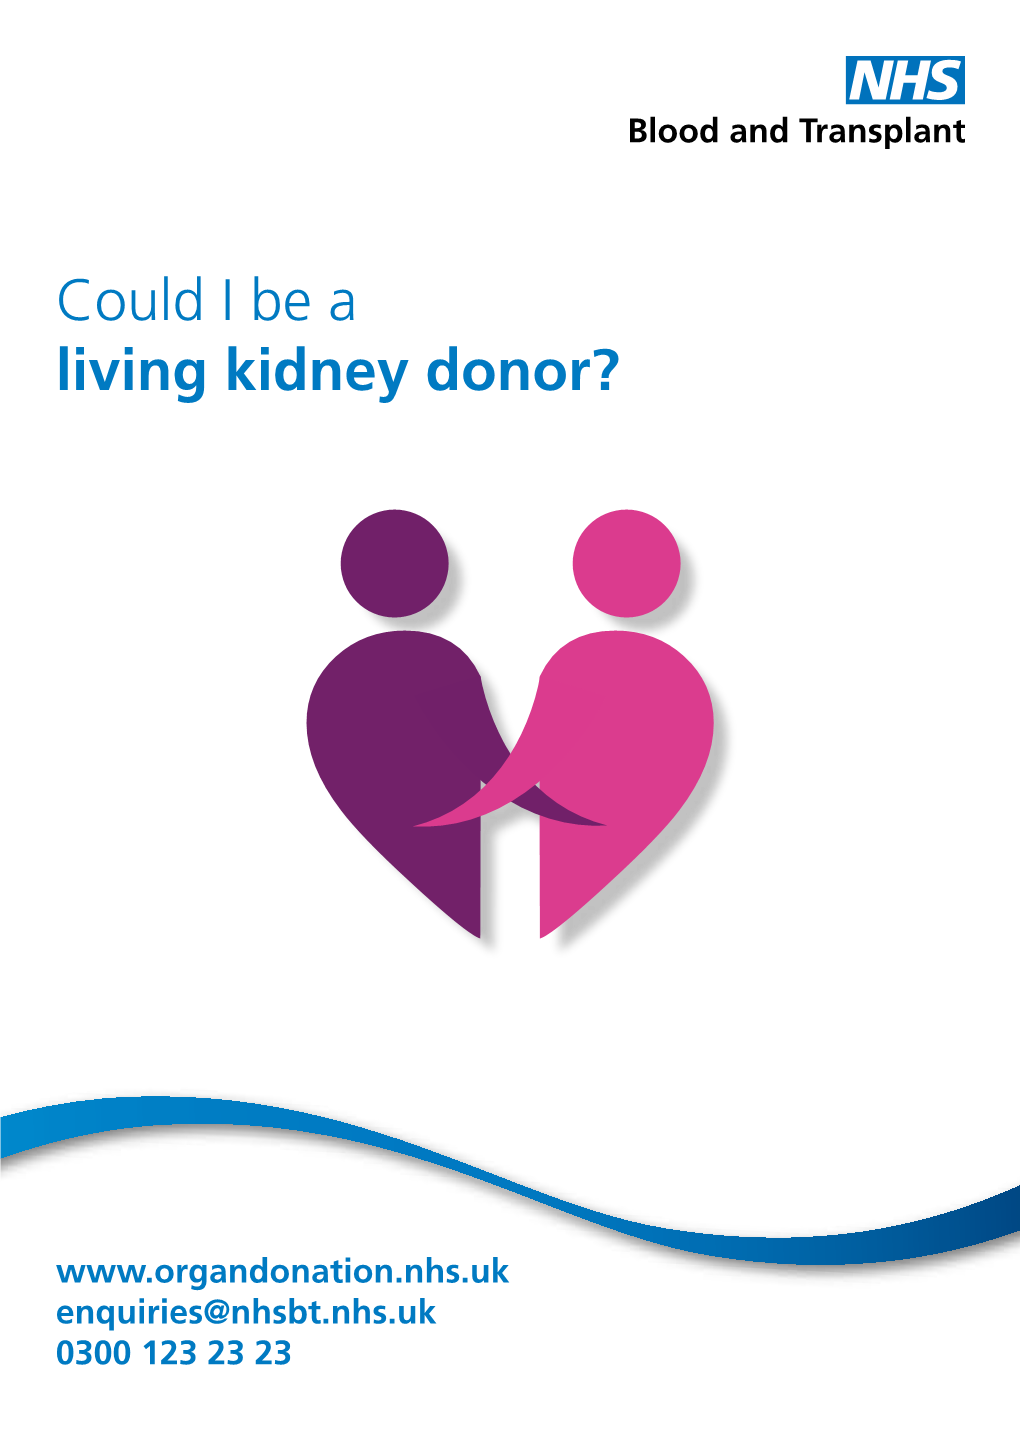 Could I Be a Living Kidney Donor?